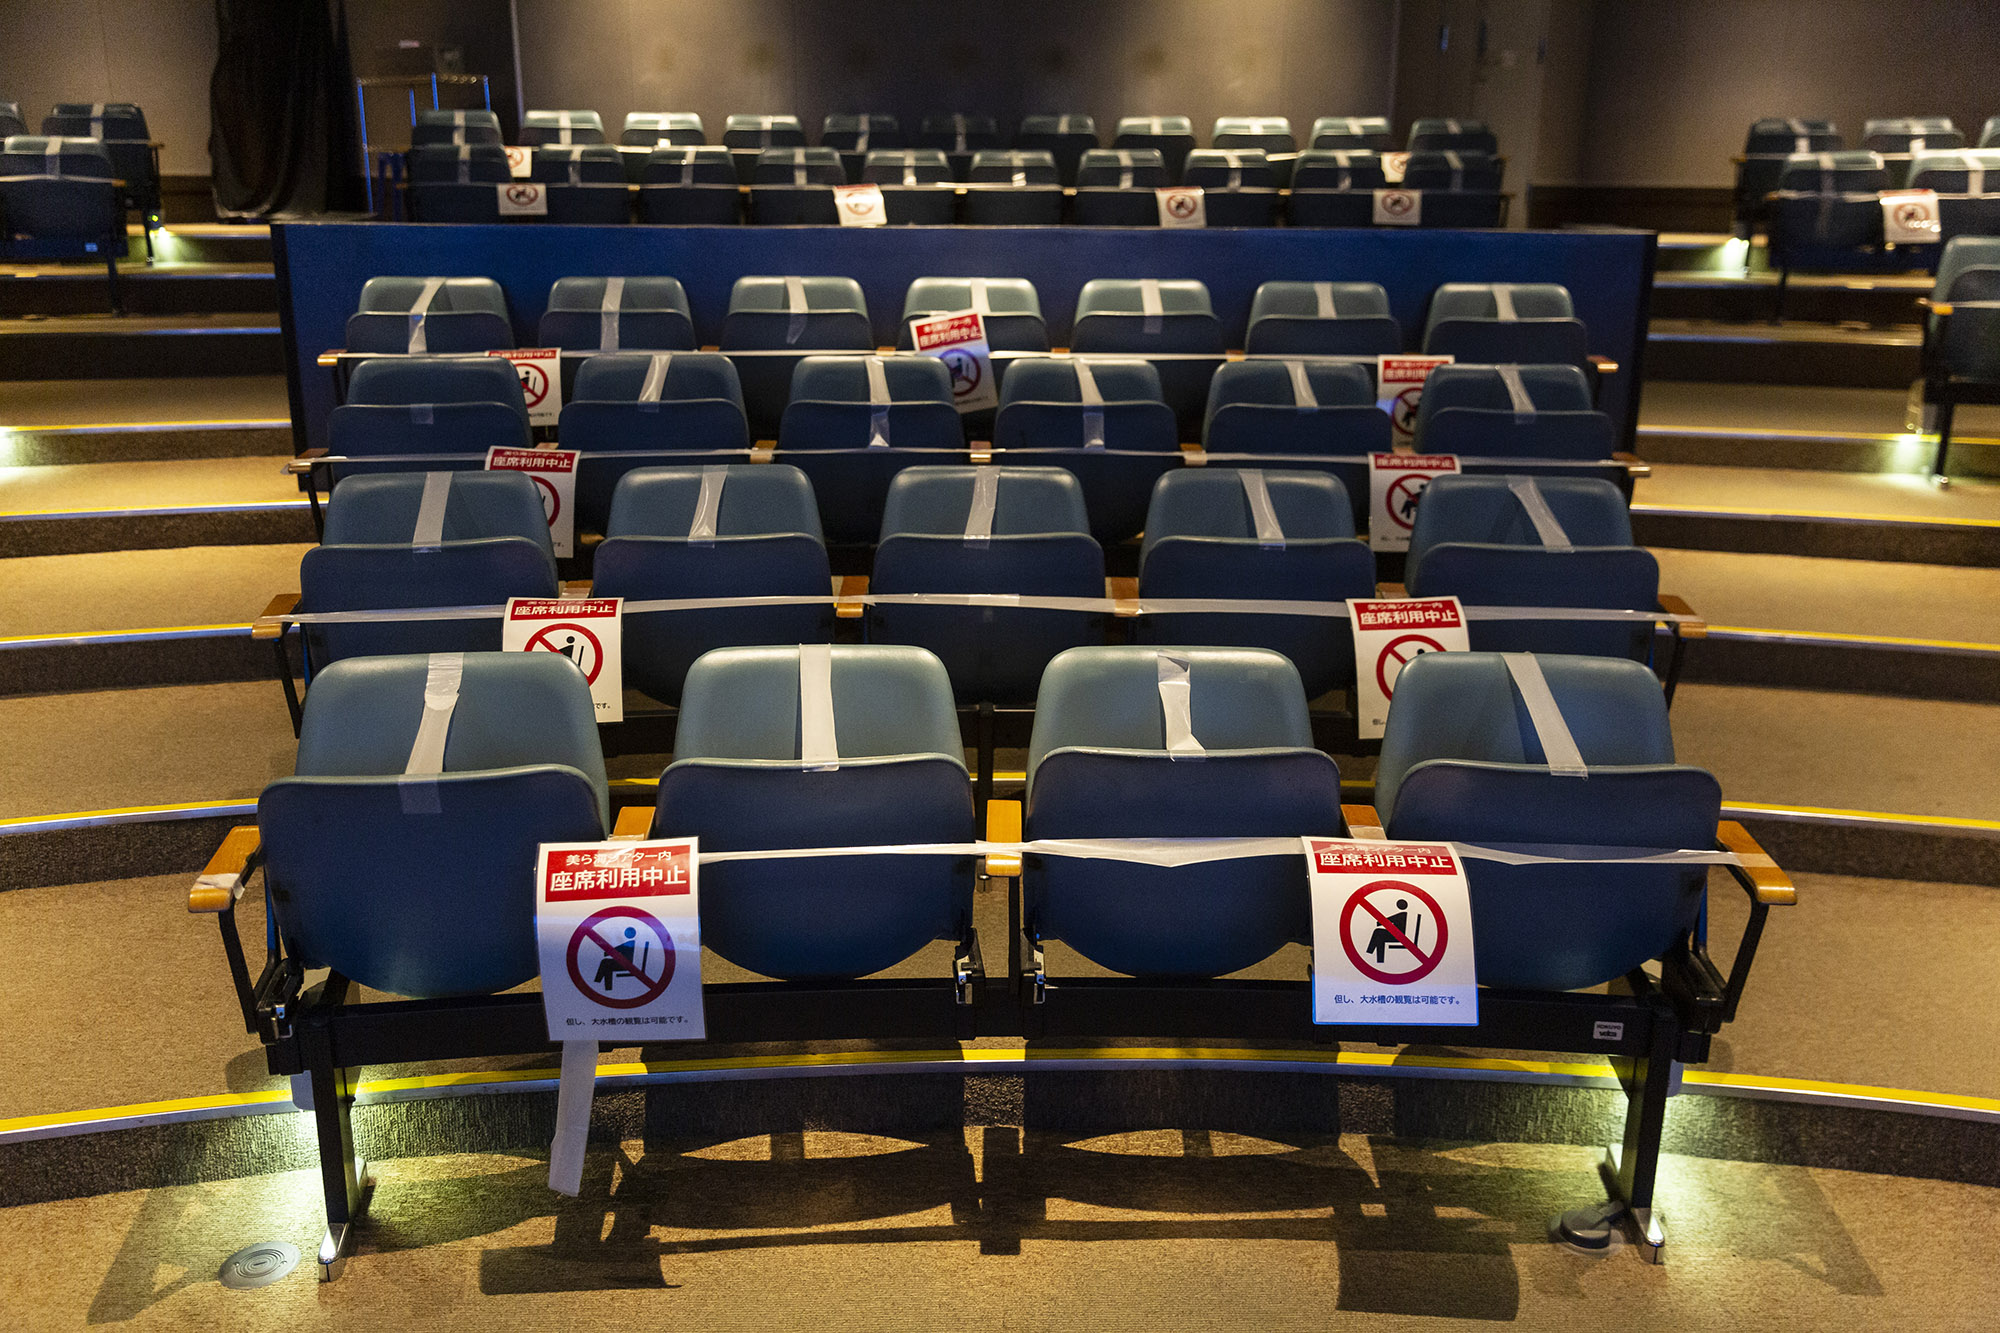 Notices are placed on seats in the Okinawa Churaumi Aquarium requesting that people don't sit down as a measure to protect against spreading coronavirus, on November 28, in Kunigami, Japan. 